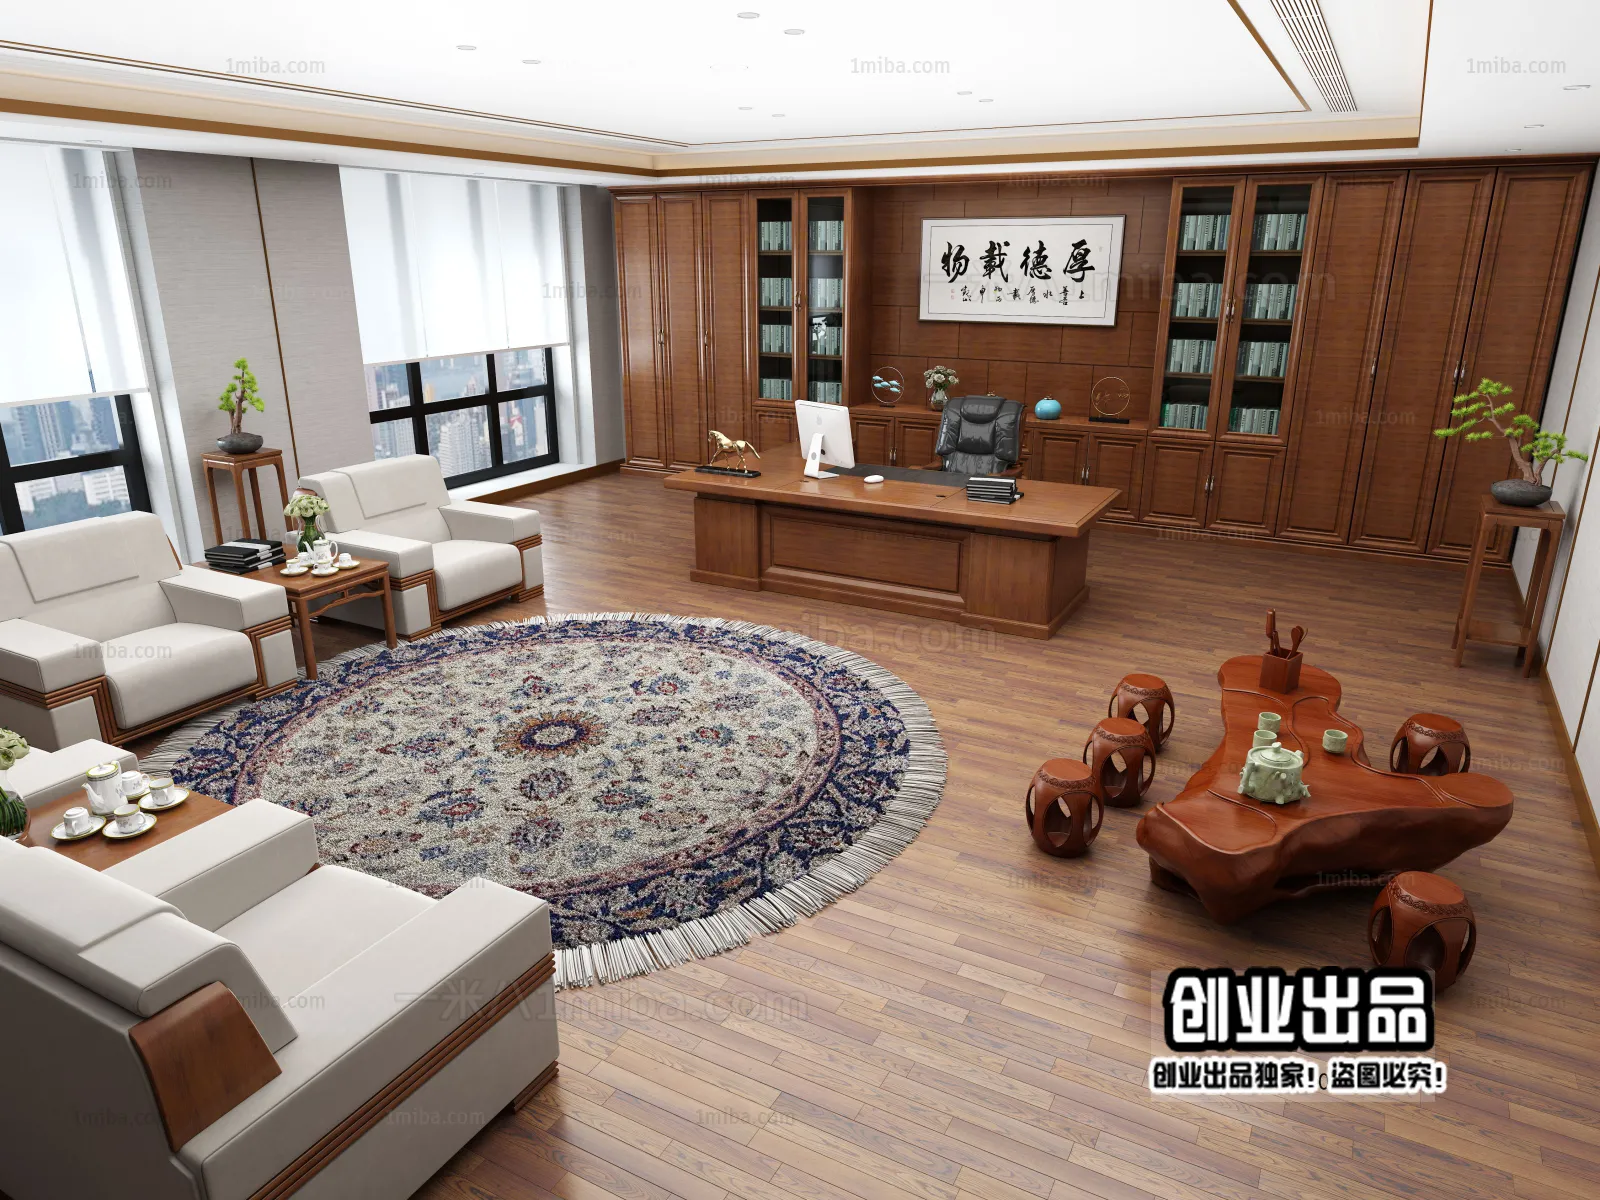 3D OFFICE INTERIOR (VRAY) – MANAGER ROOM 3D SCENES – 031